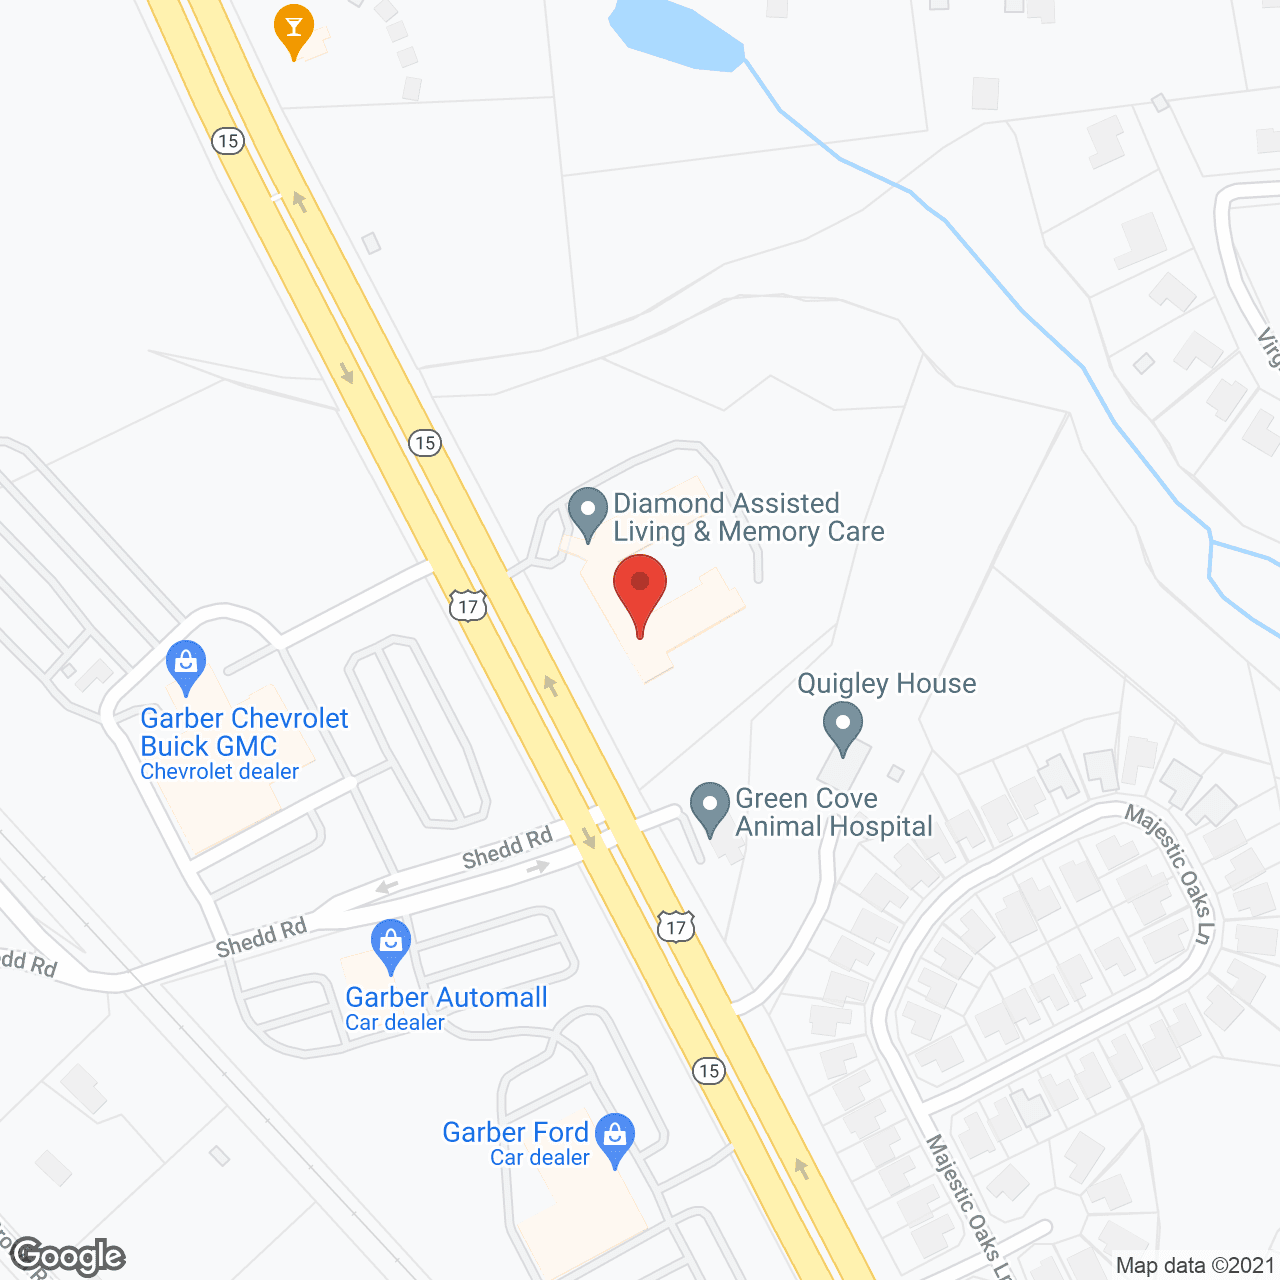 Diamond Assisted Living in google map